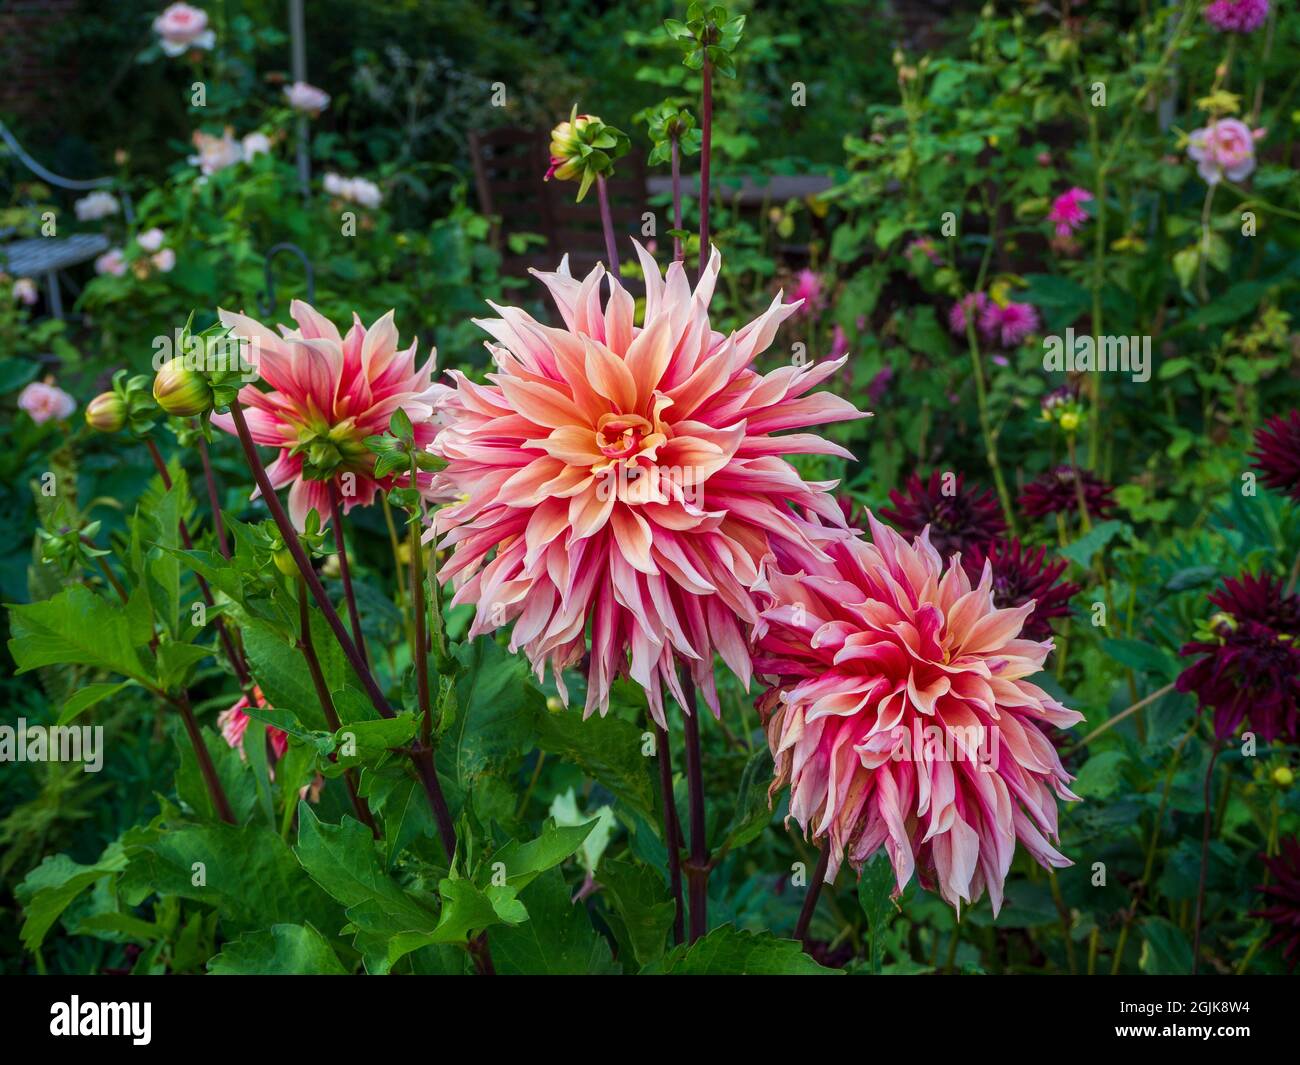 Dahlia 'Labyrinth' at Chenies Manor, Buckinghamshire. Detail of a large decorative dahlia bloom in the Sunken garden.. Stock Photo